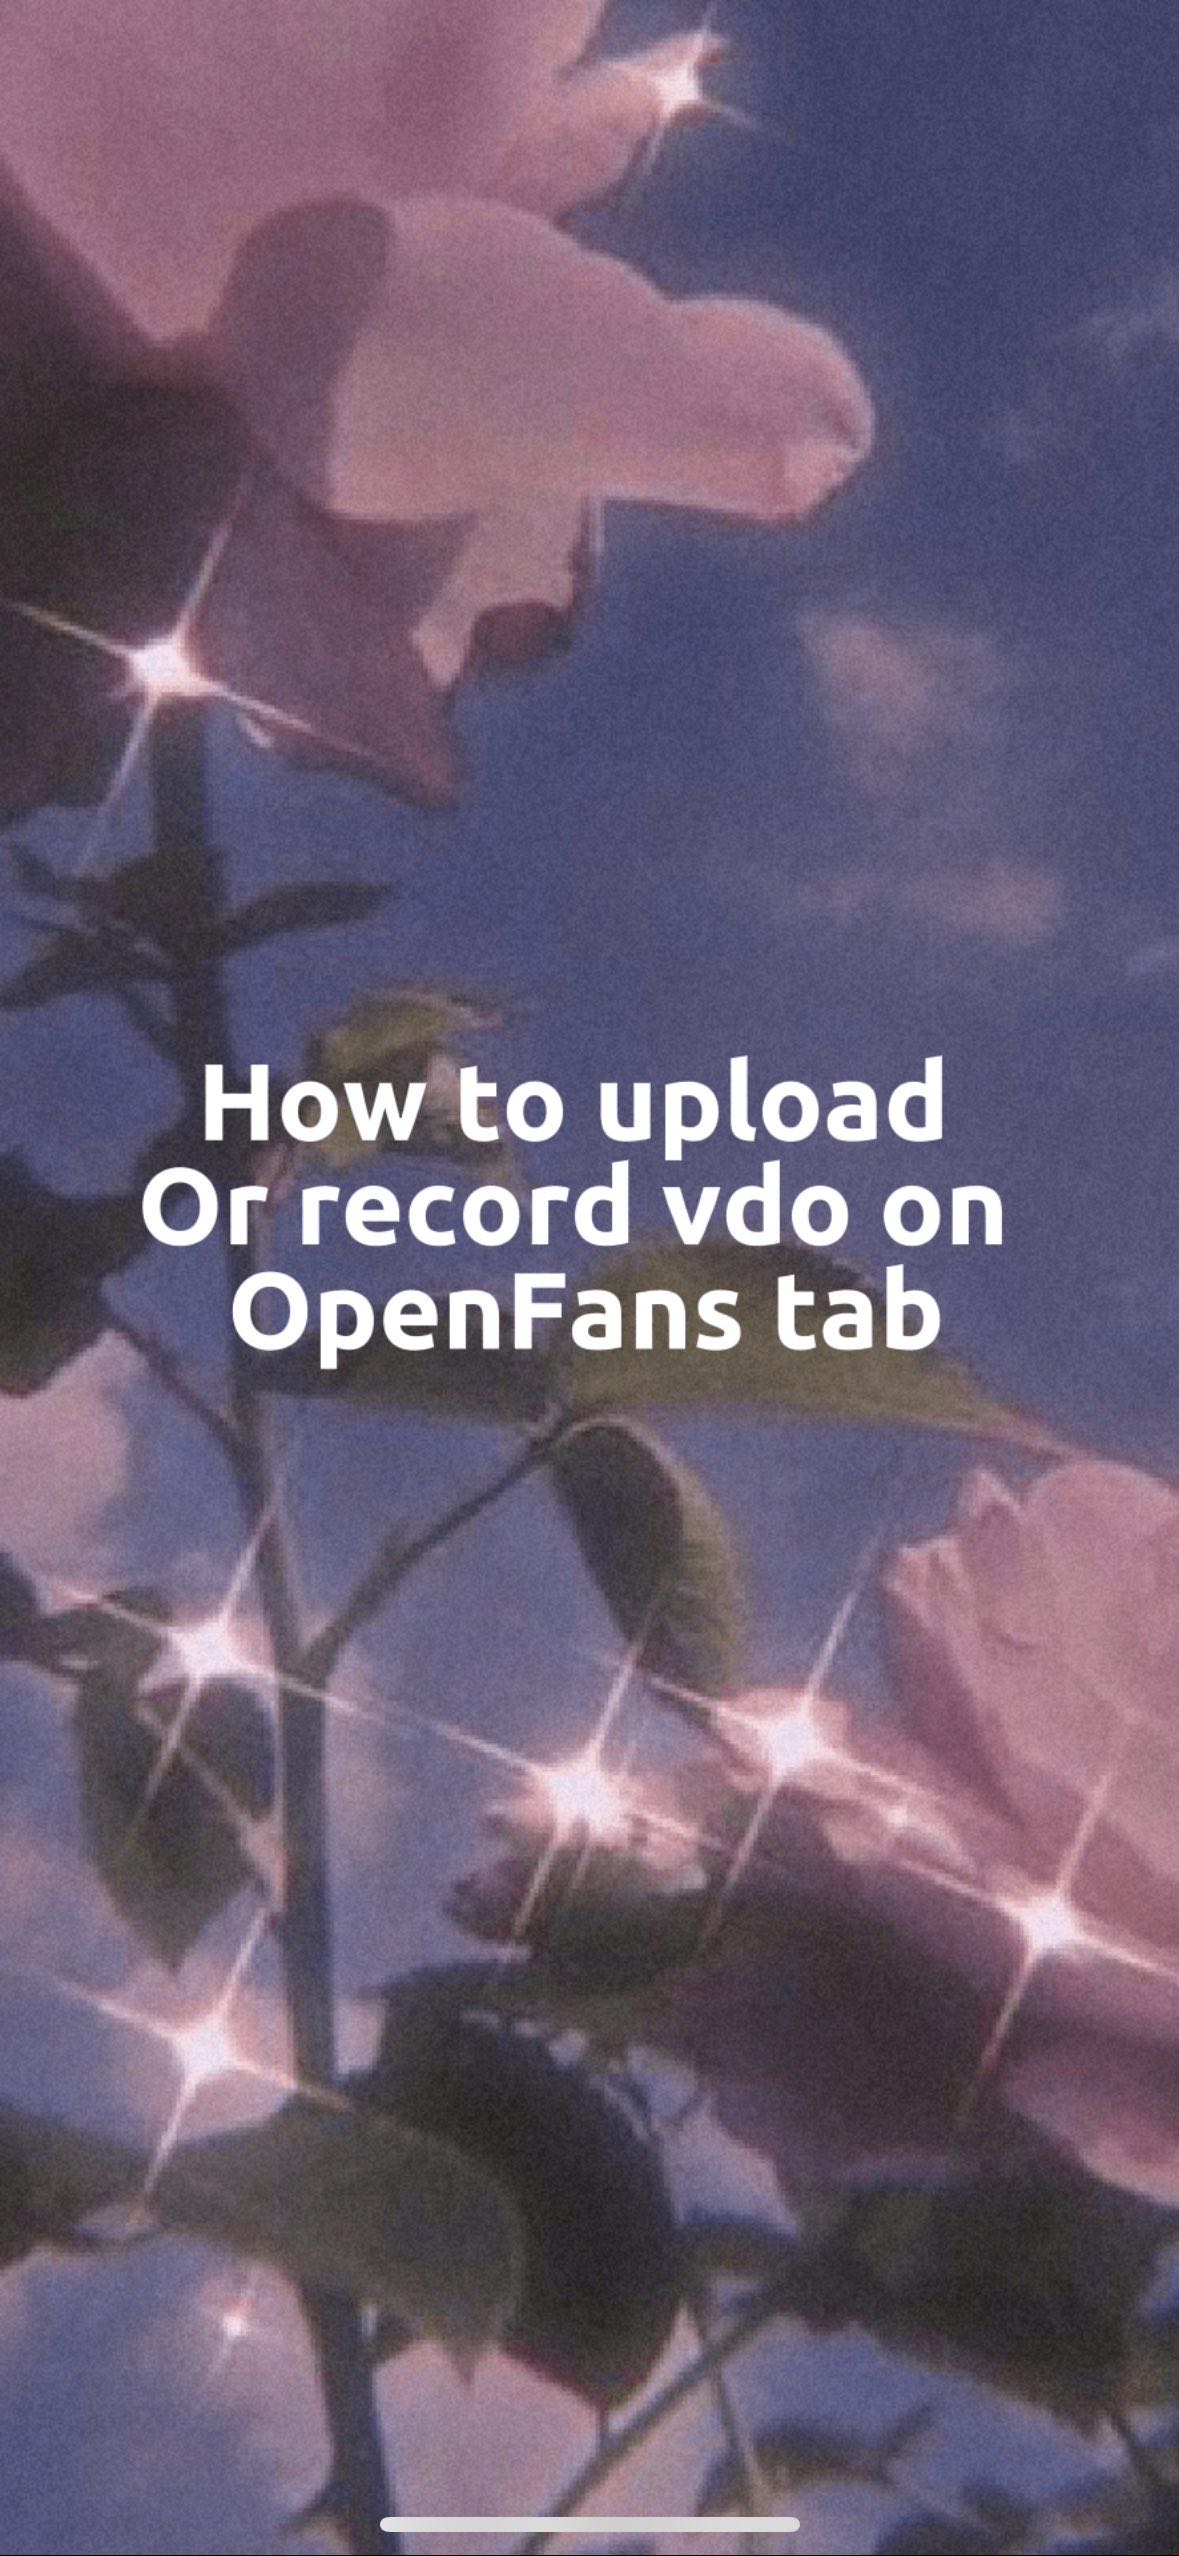 Openfans : Check now!